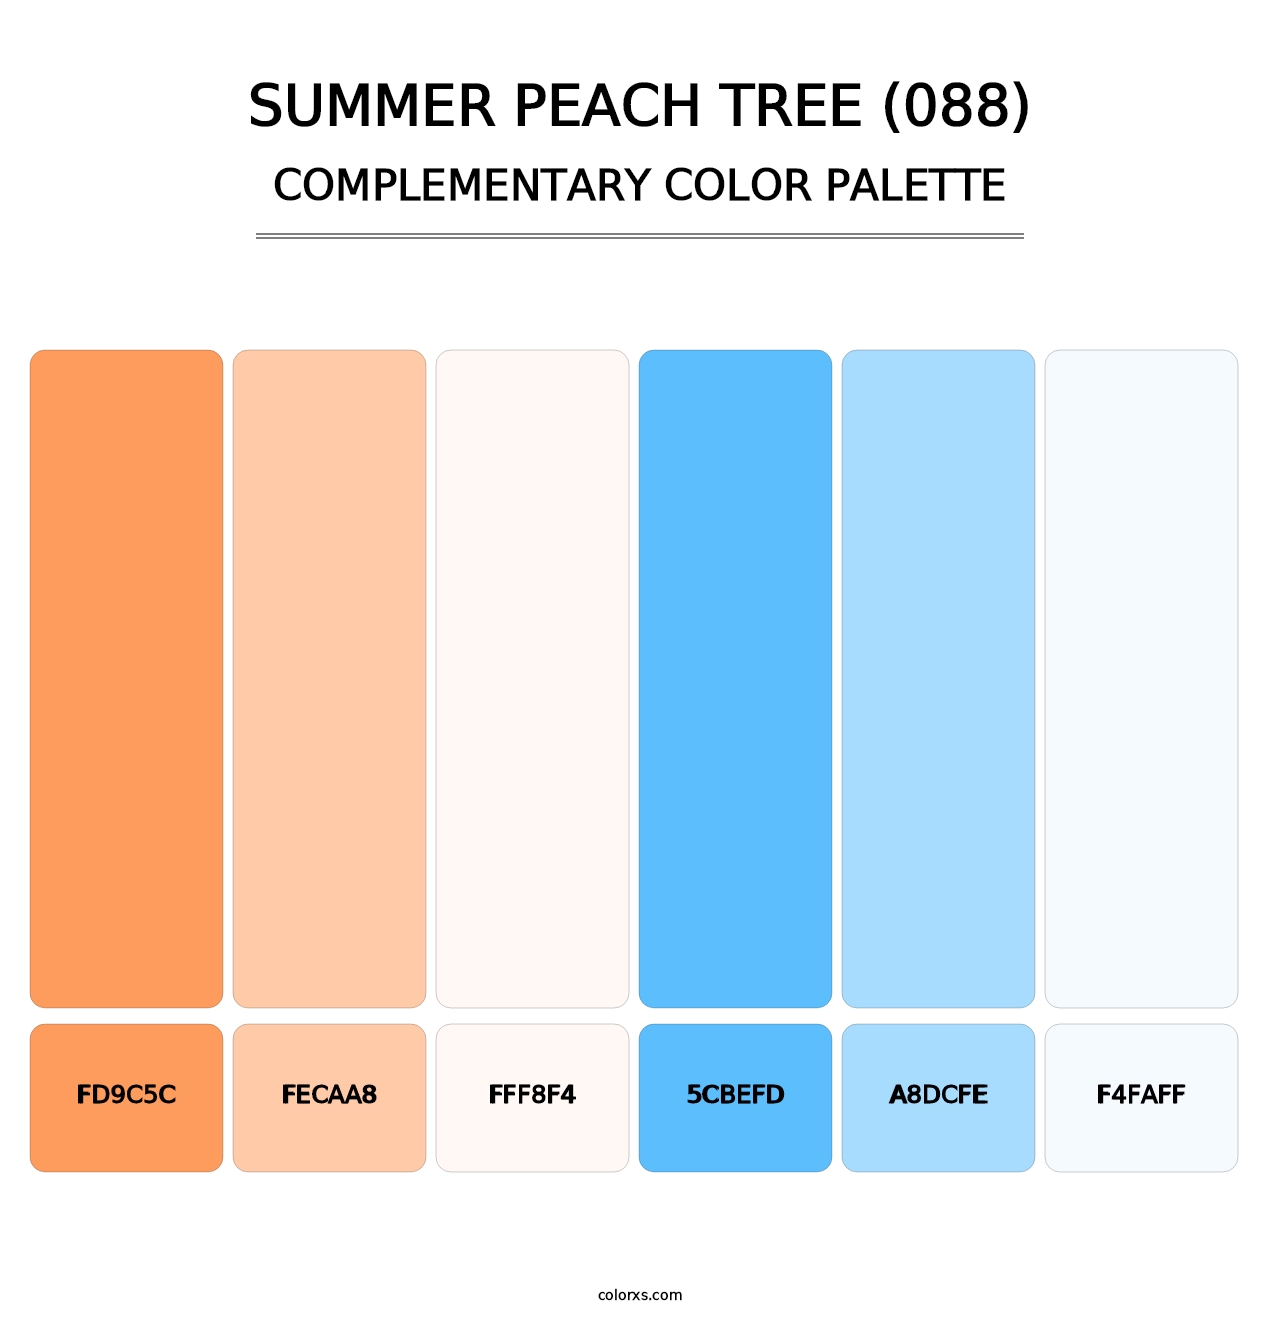 Summer Peach Tree (088) - Complementary Color Palette